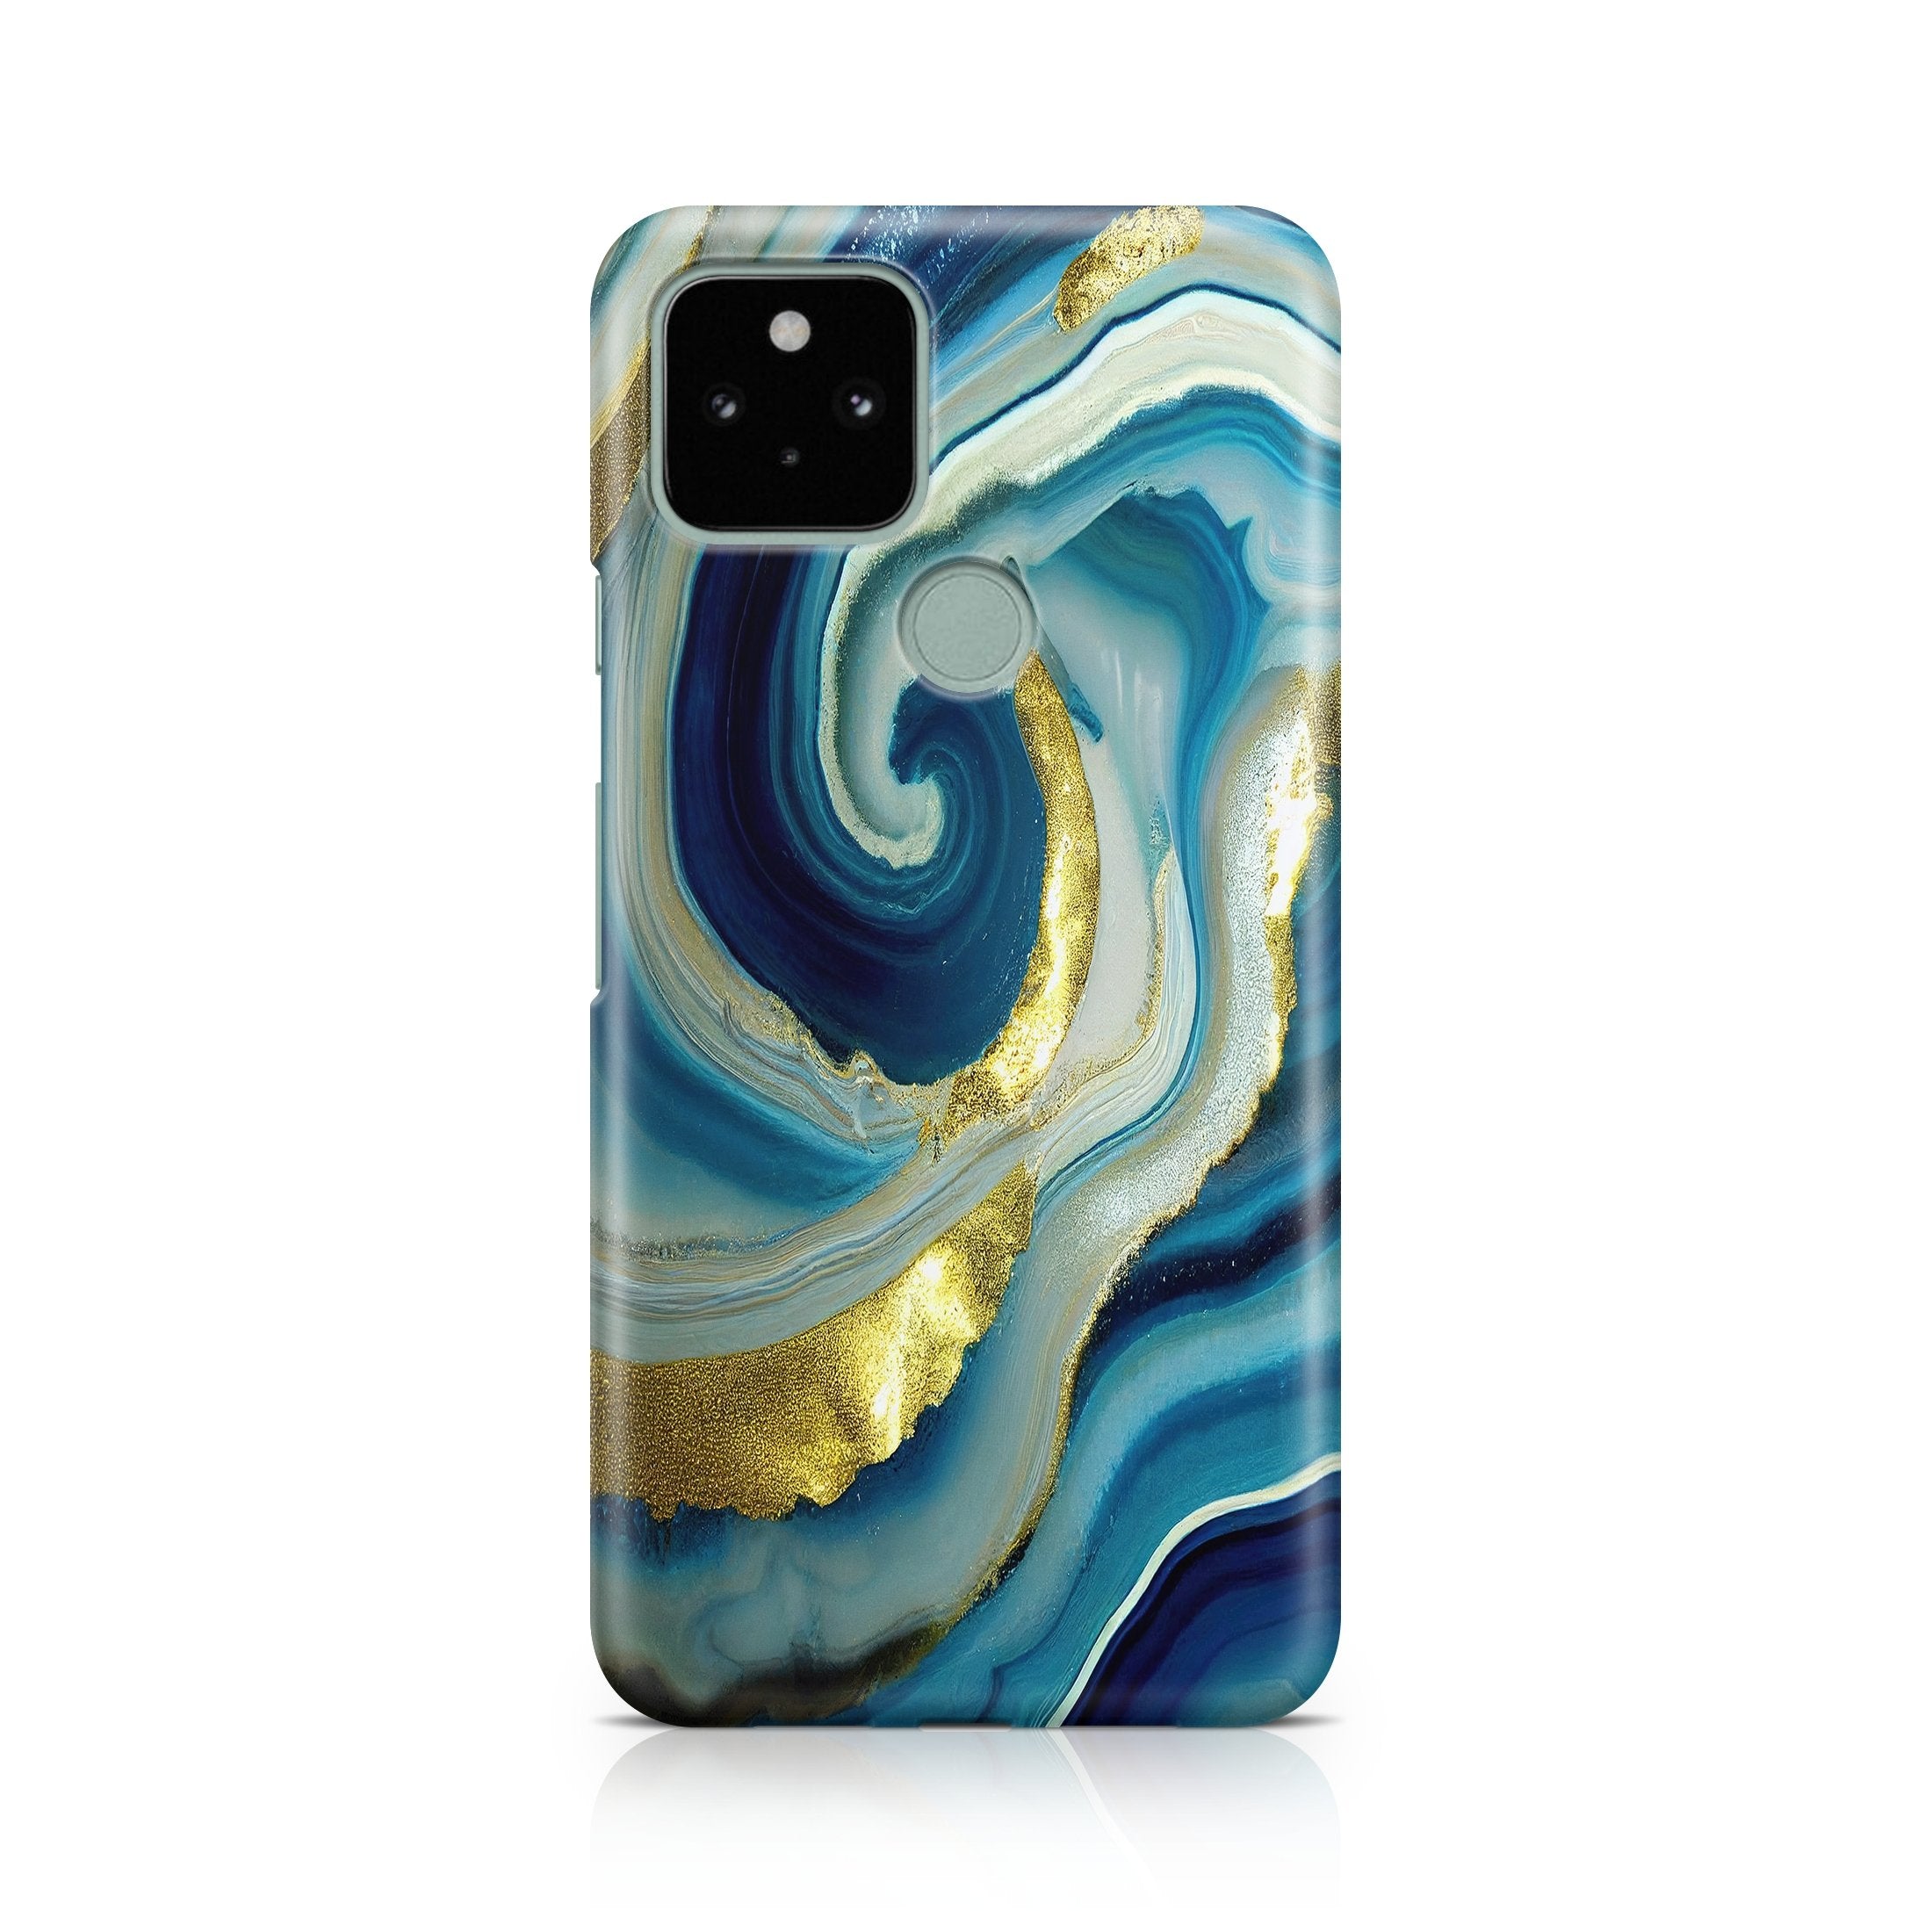 Catalyst Blue Marble - Google phone case designs by CaseSwagger